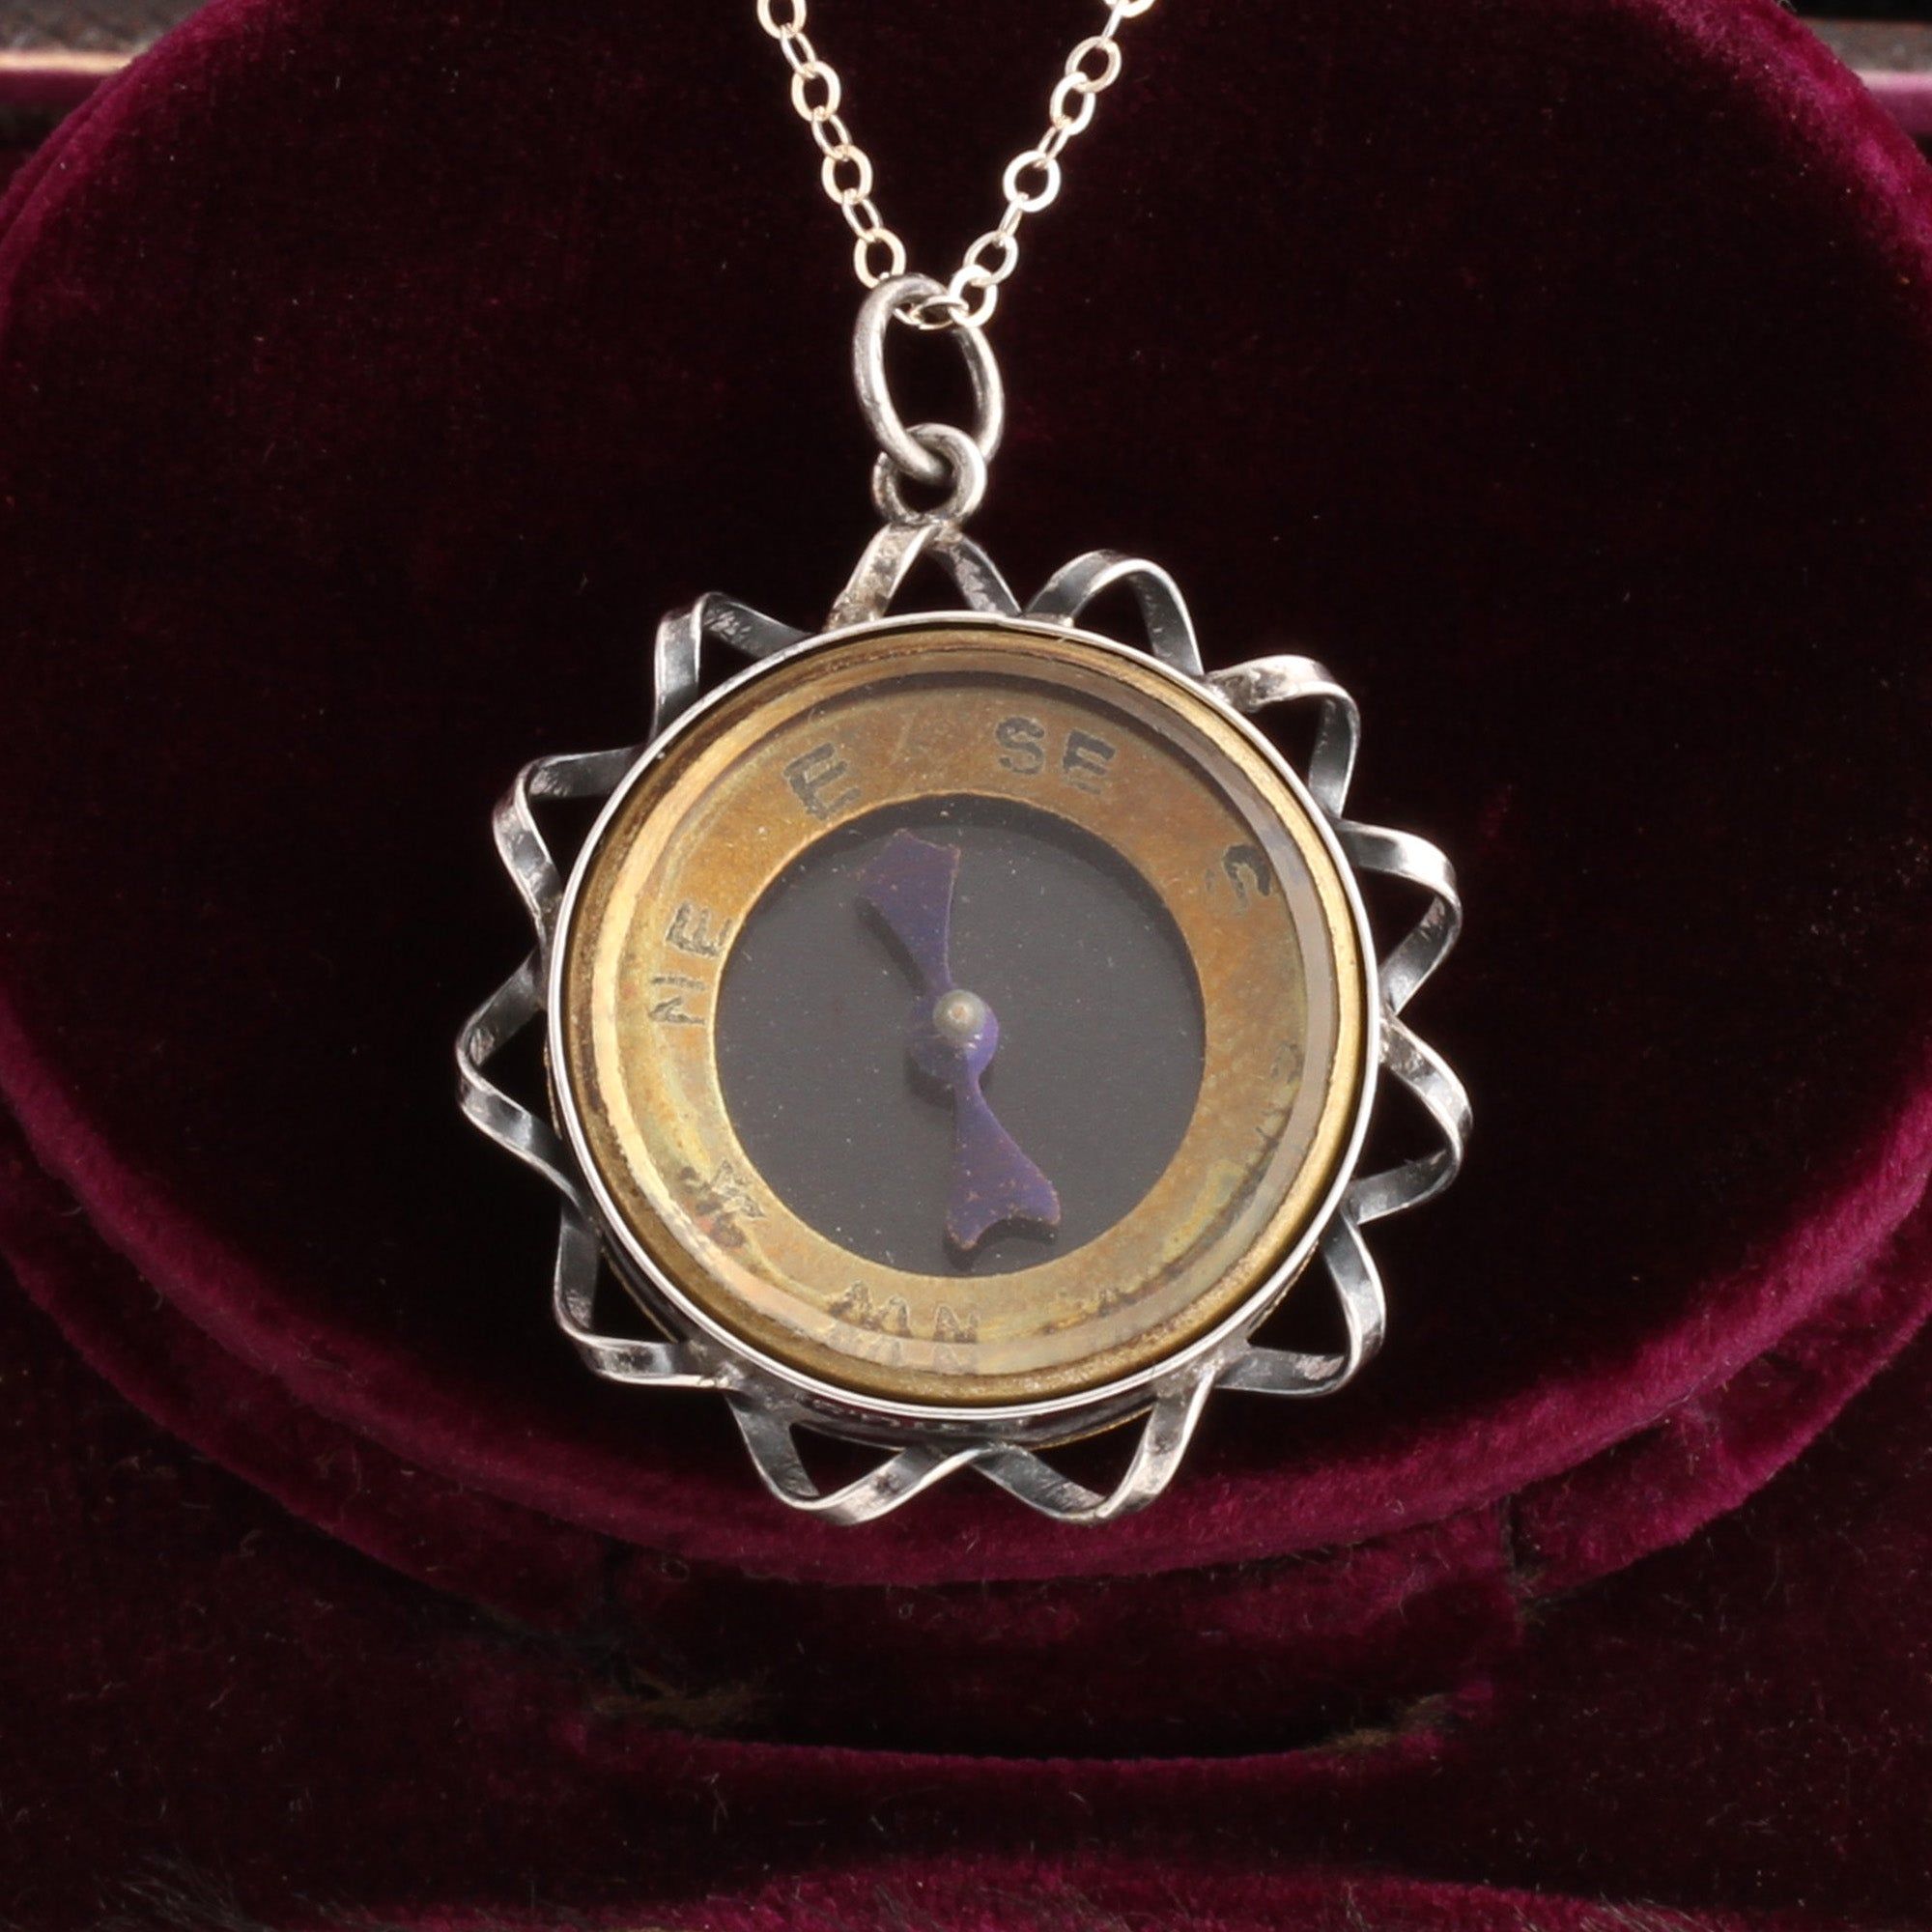 Edwardian Silver Compass Necklace